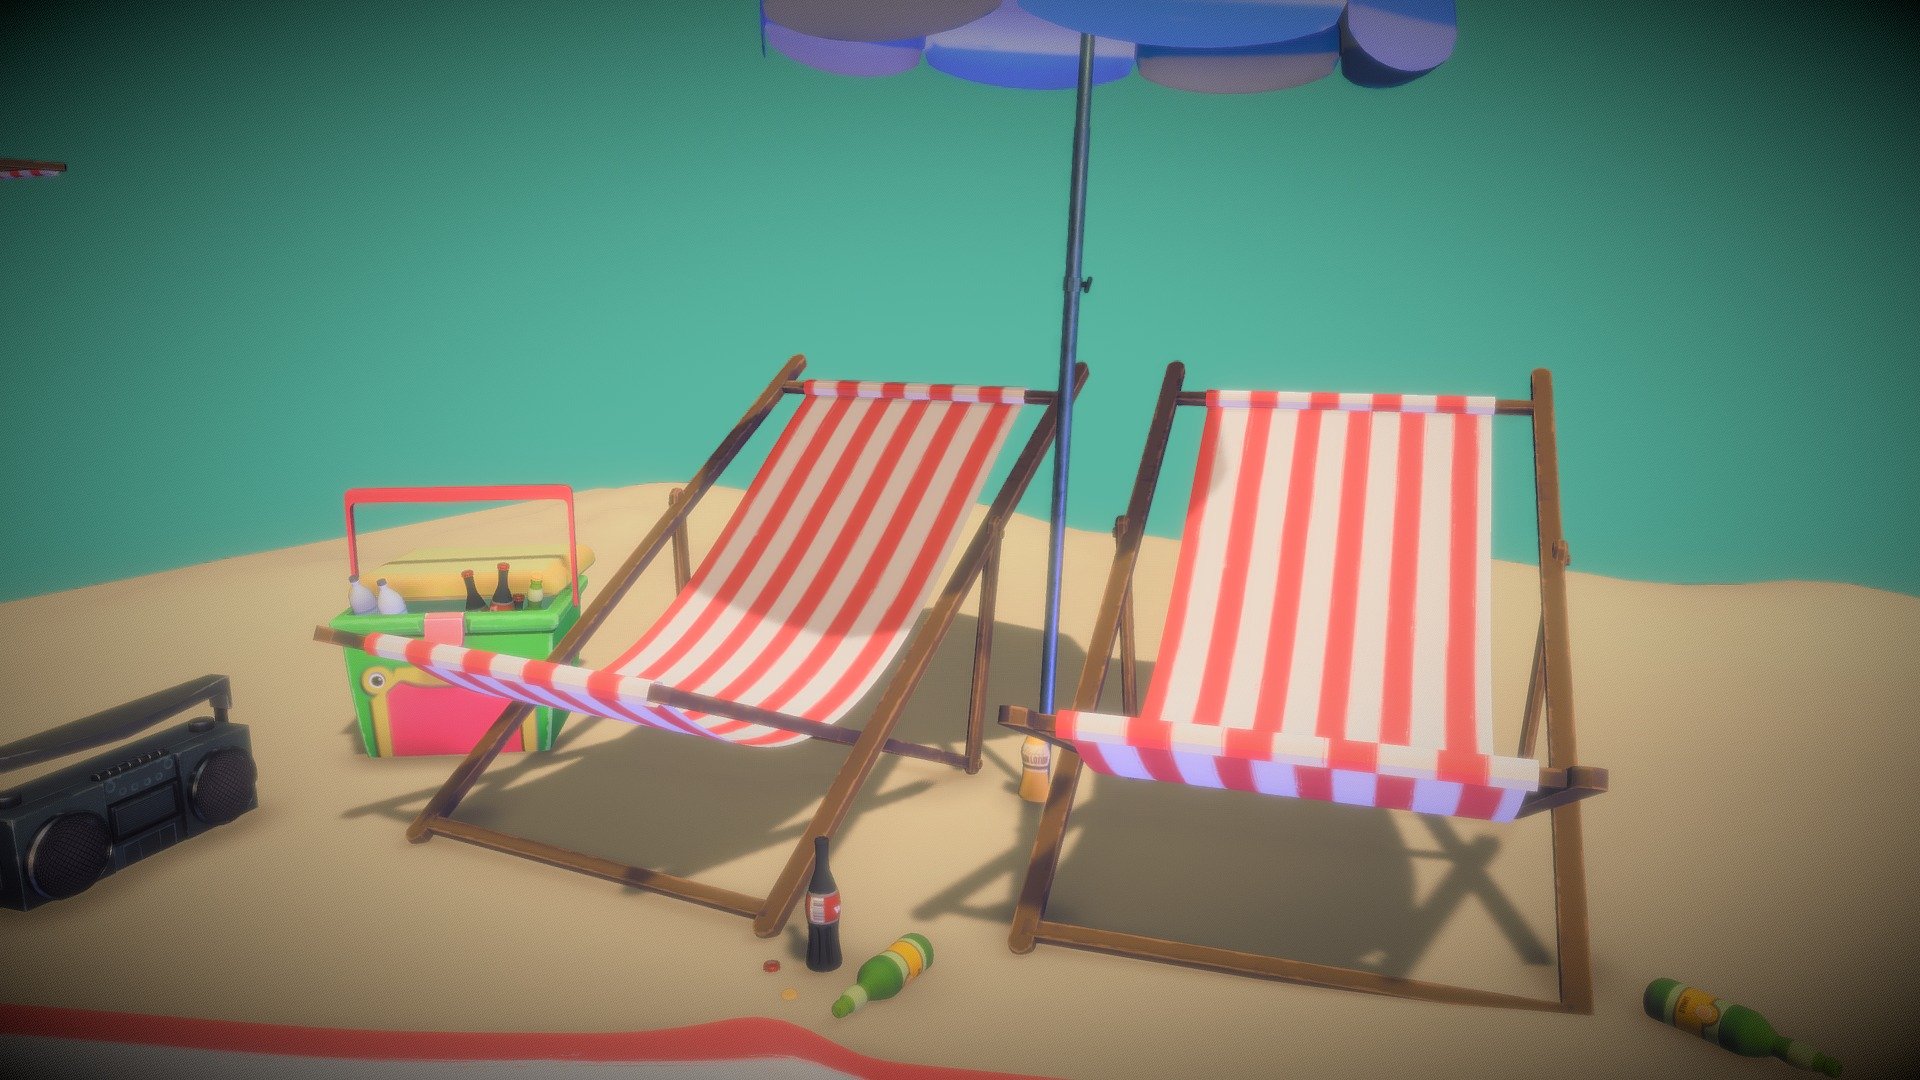 Was meant to be for a Sketchfab challenge a long time ago, but lost track of time. So decided to extend it and do a little pack of beach assets instead. Texture is 4k, but none of the assets are relying on that size and are quite tolerant to downsizing, but it's just to have the source-size. Same thing with the cloth is mostly just to show that it can be used for whatever you need it for, so the high-tri count on the cloth is just to give some examples.

In terms of my own journey here, I did a bit of a more of a deep-dive into Substance Painter which was long overdue 3d model